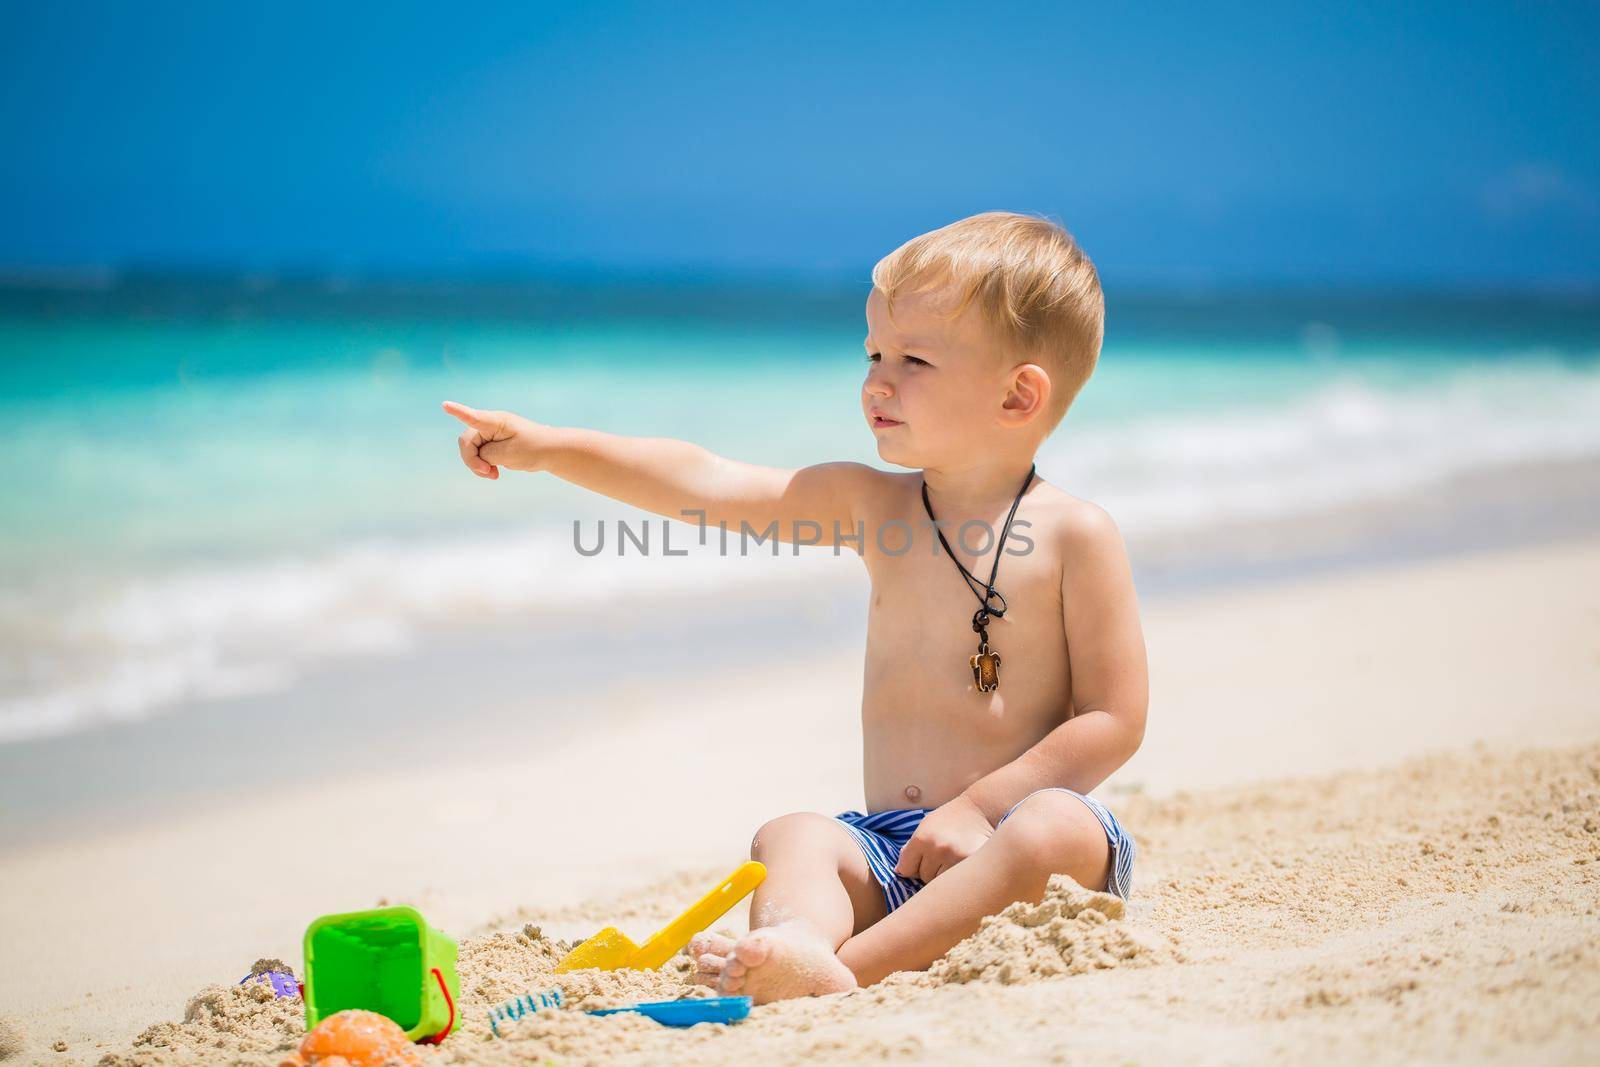 Cute baby boy playing with beach toys on tropical beach